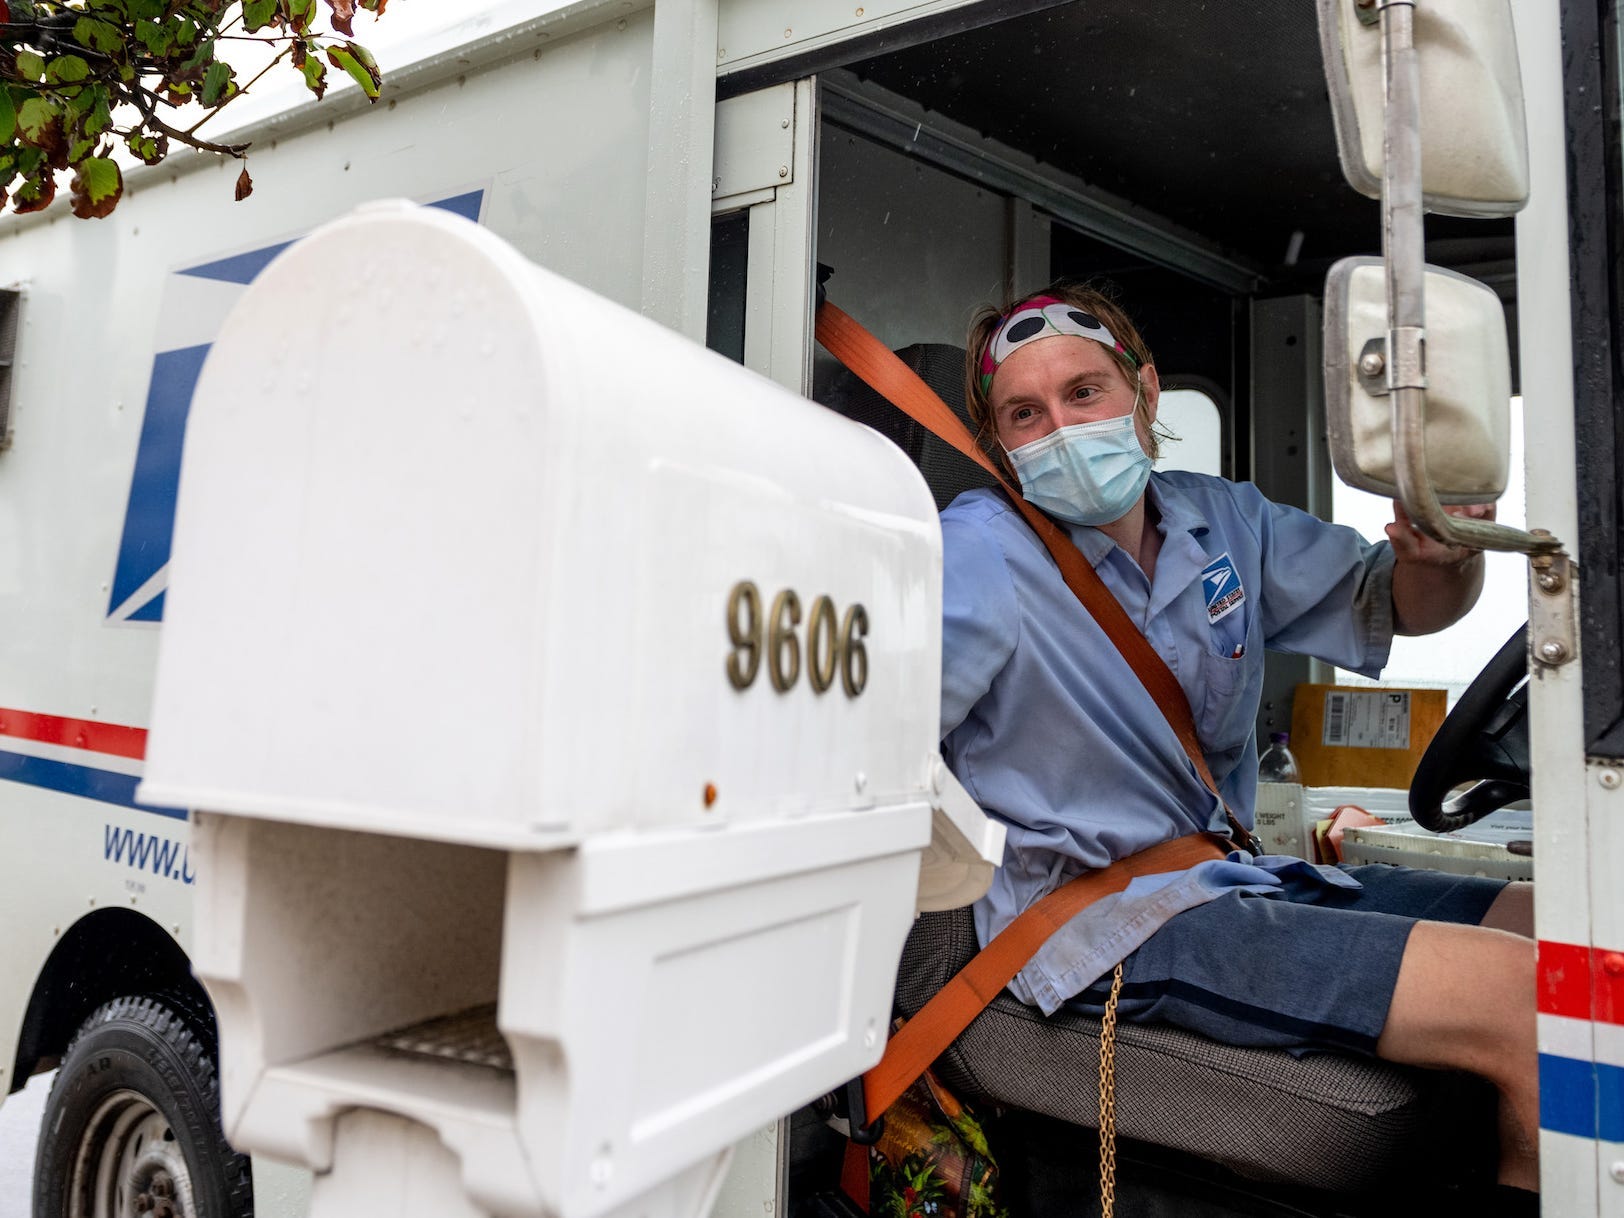 A USPS worker wearing a mask puts envelopes in a mailbox.